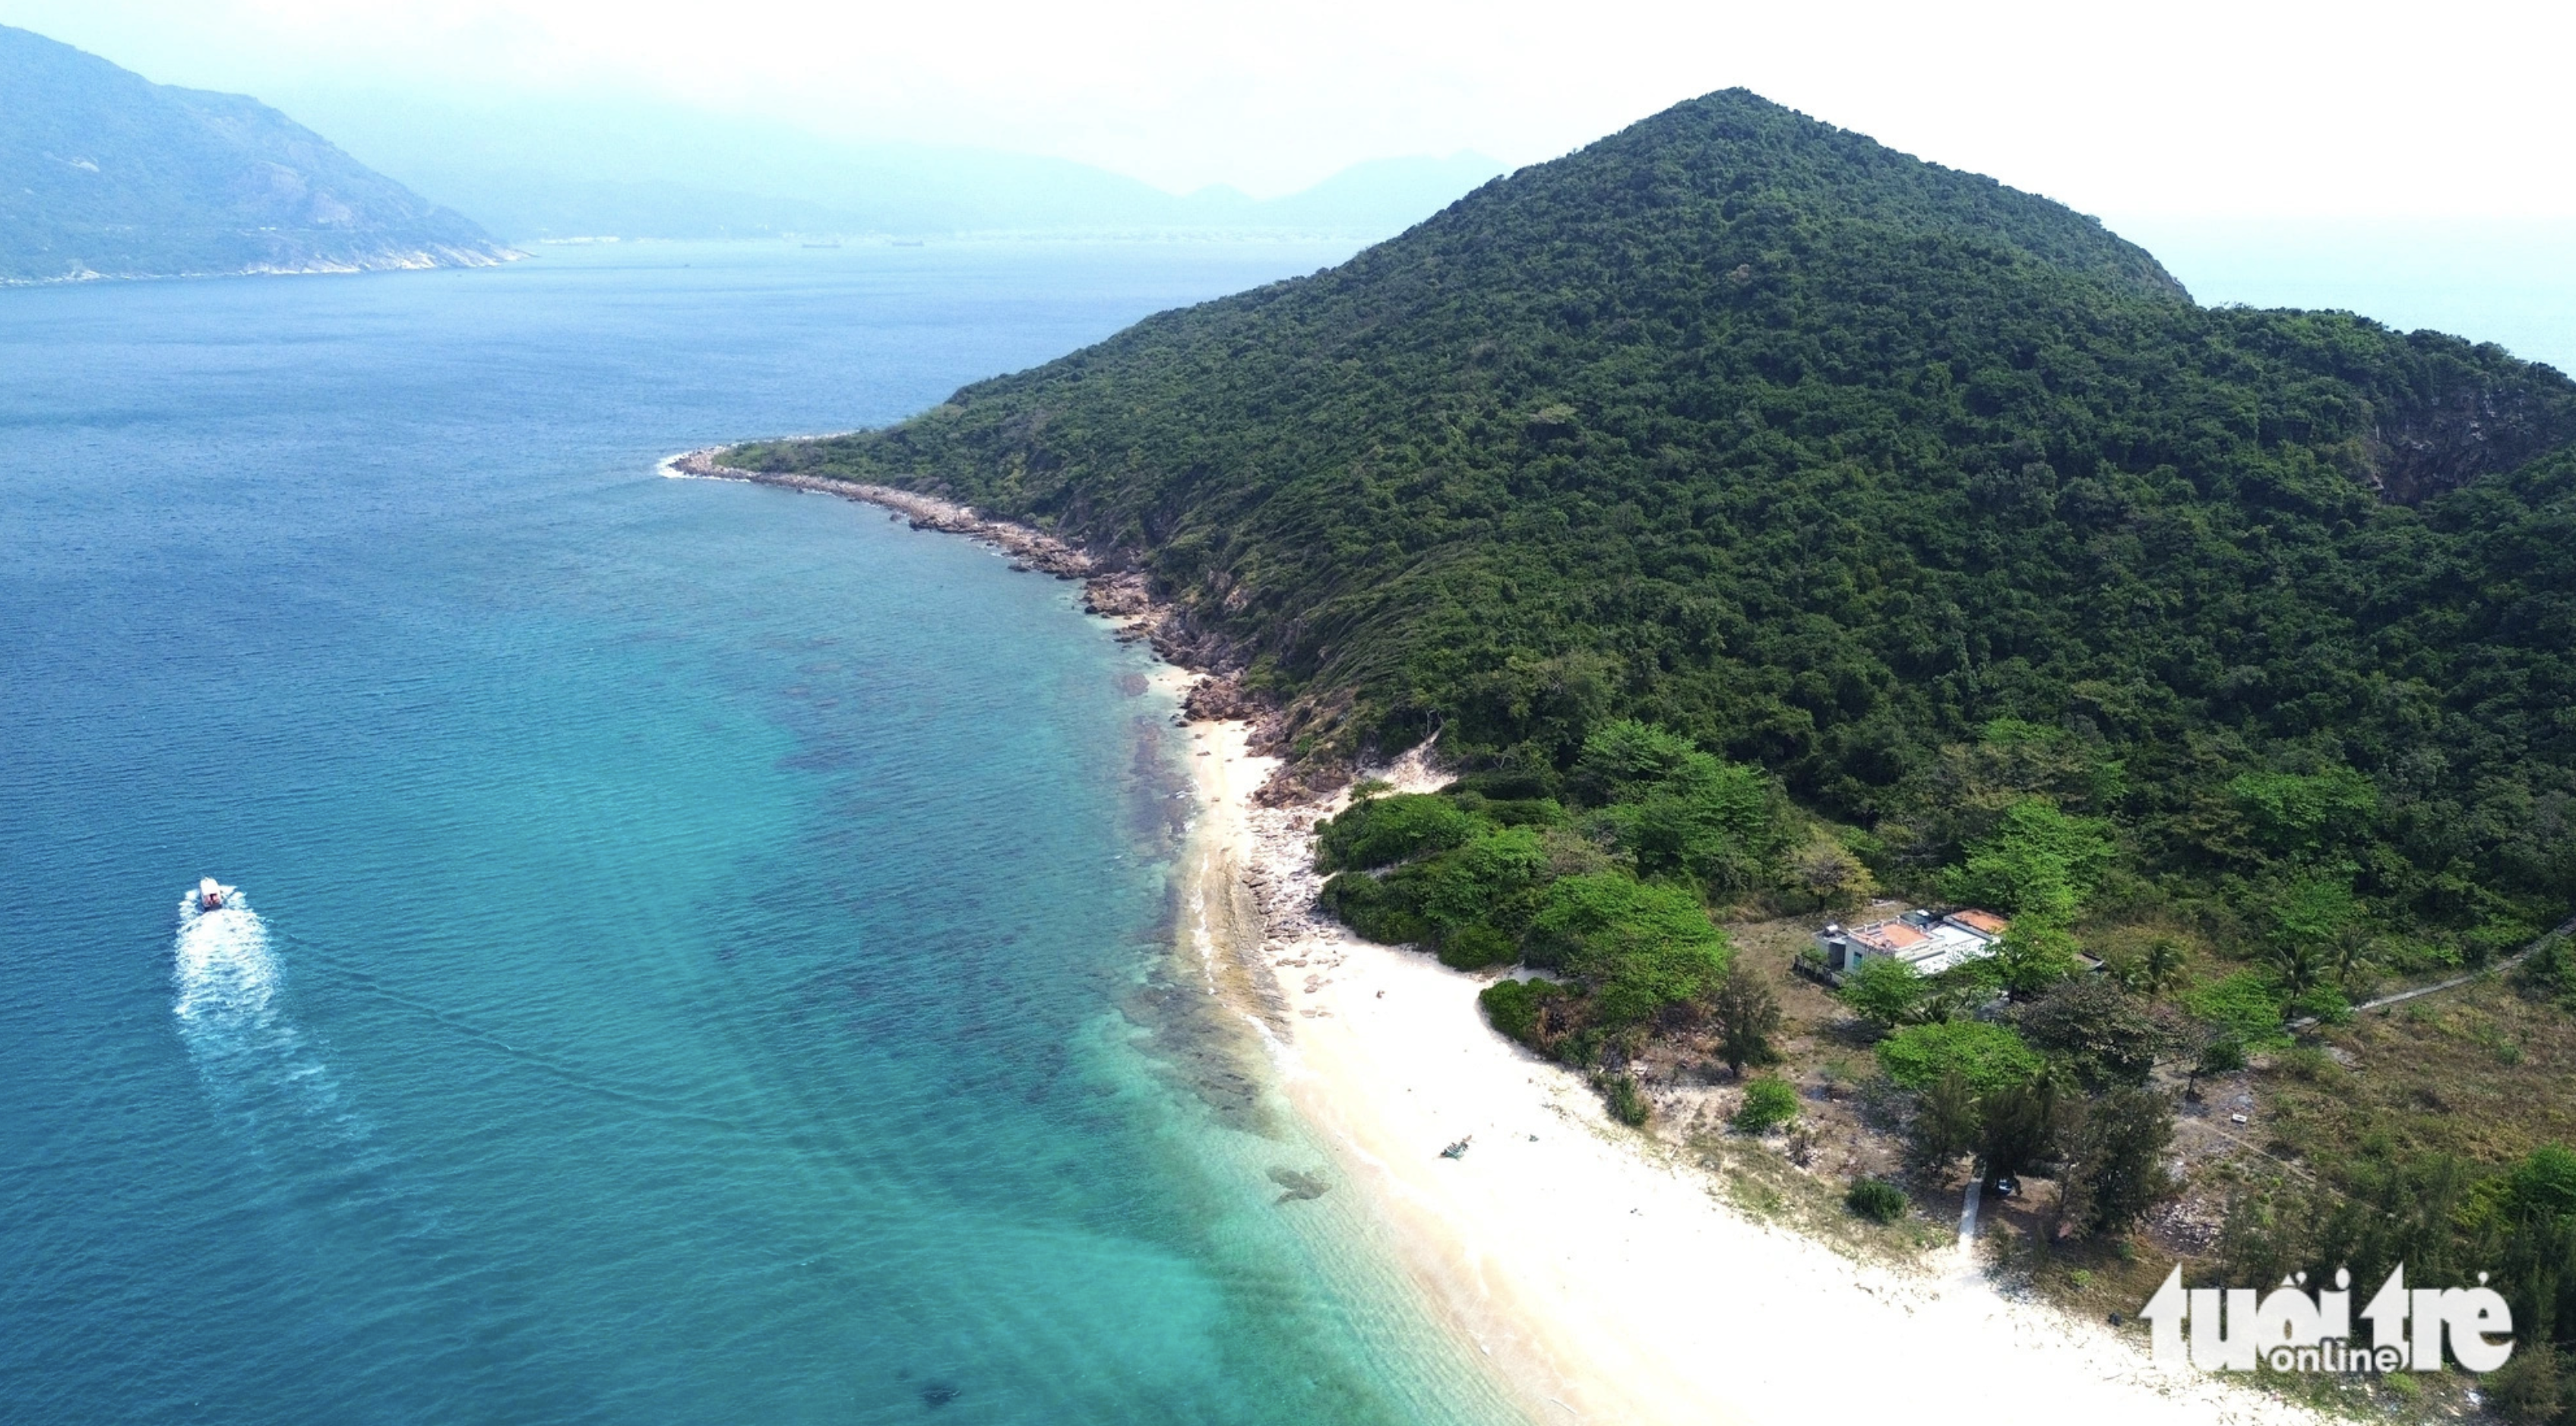 The northern part of Hon Nua Island belongs to Phu Yen Province, while its southern part is managed by Khanh Hoa Province. Photo: Nguyen Hoang / Tuoi Tre